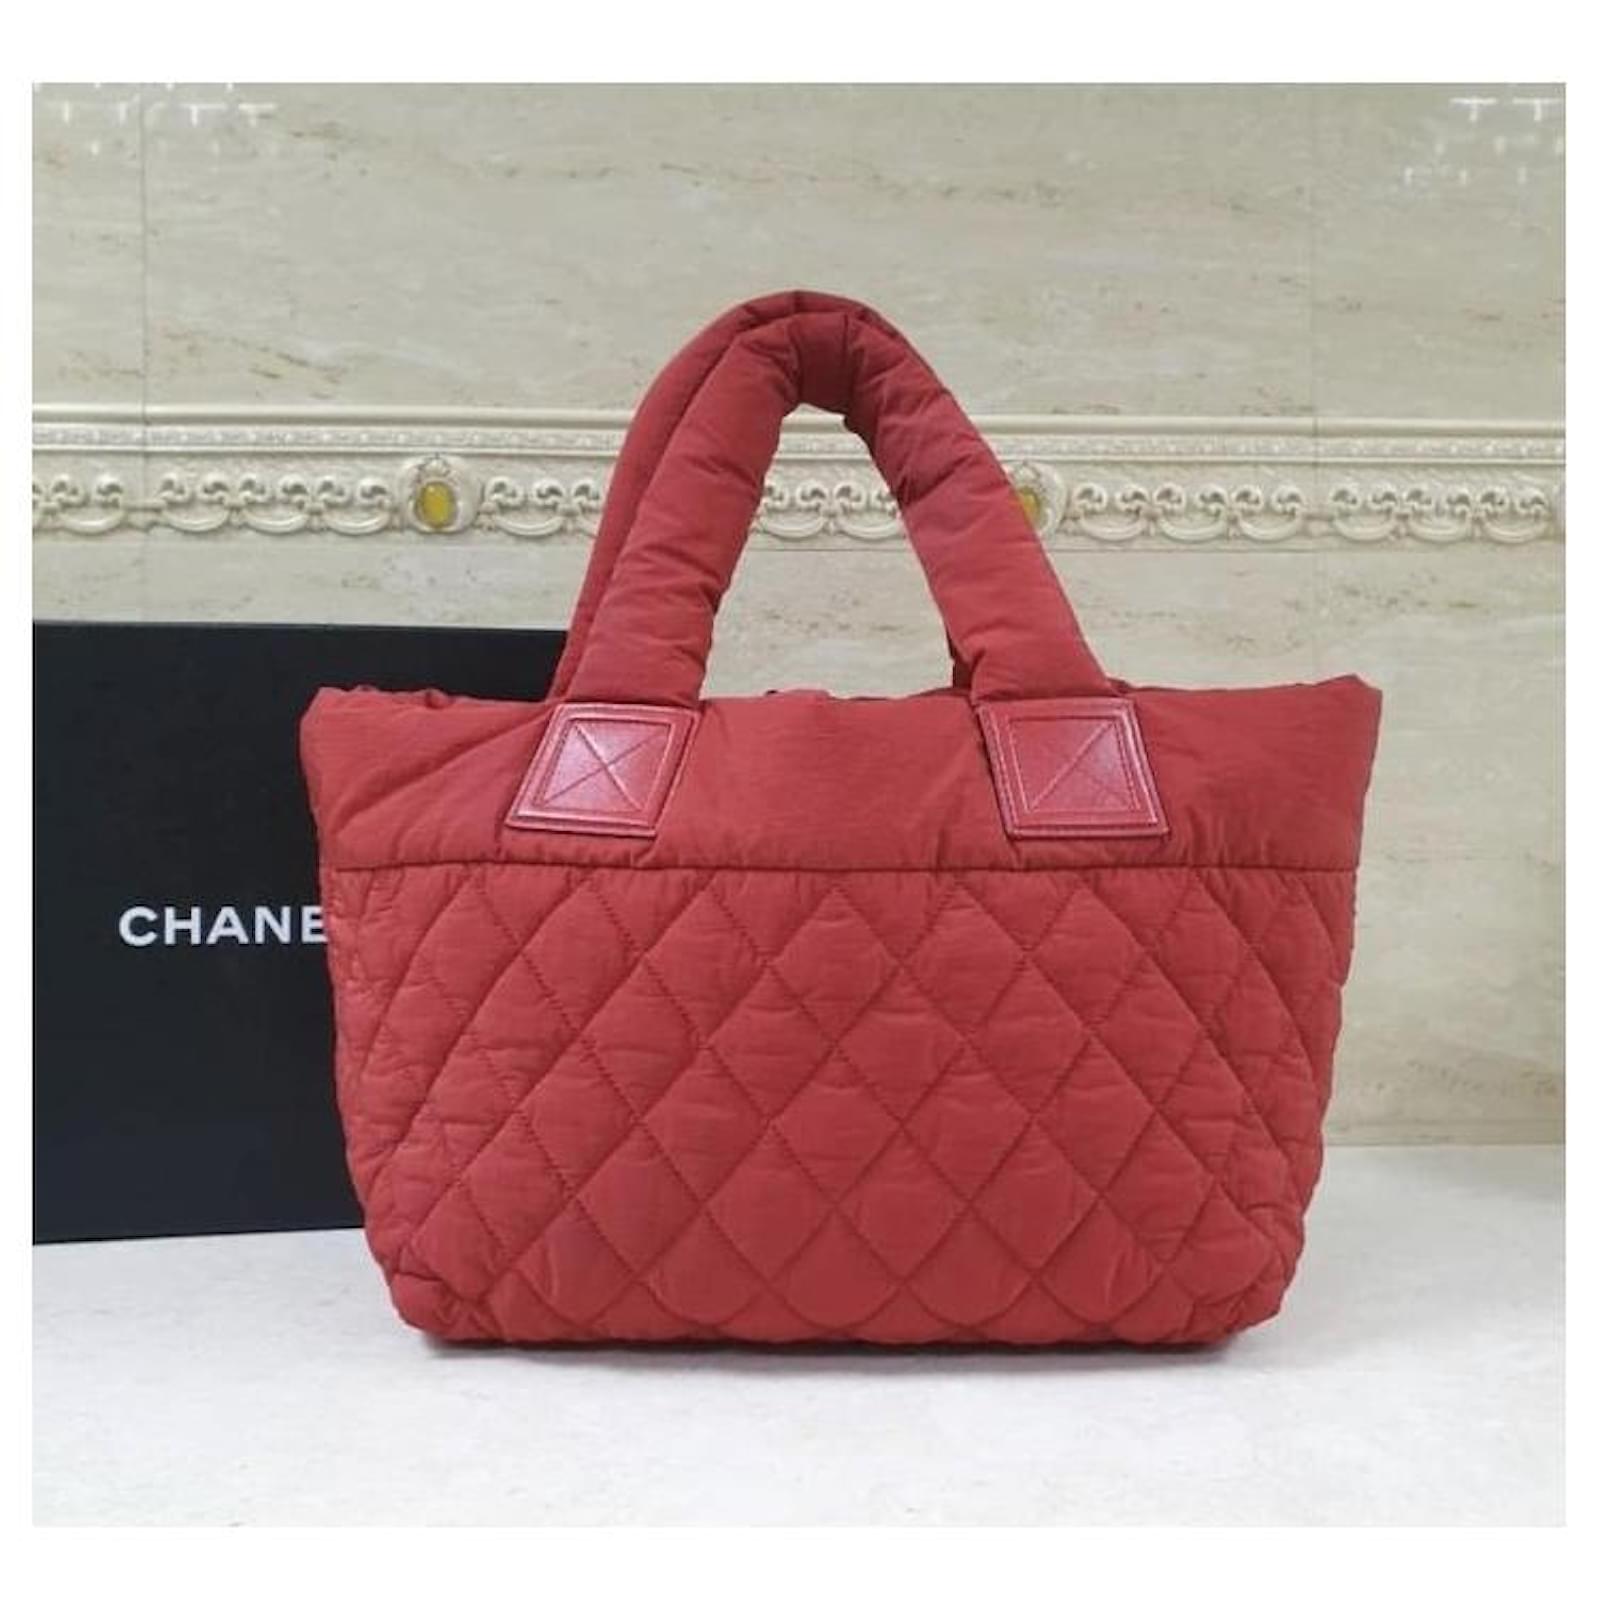 Chanel Coco Cocoon Puffer Bag Tote